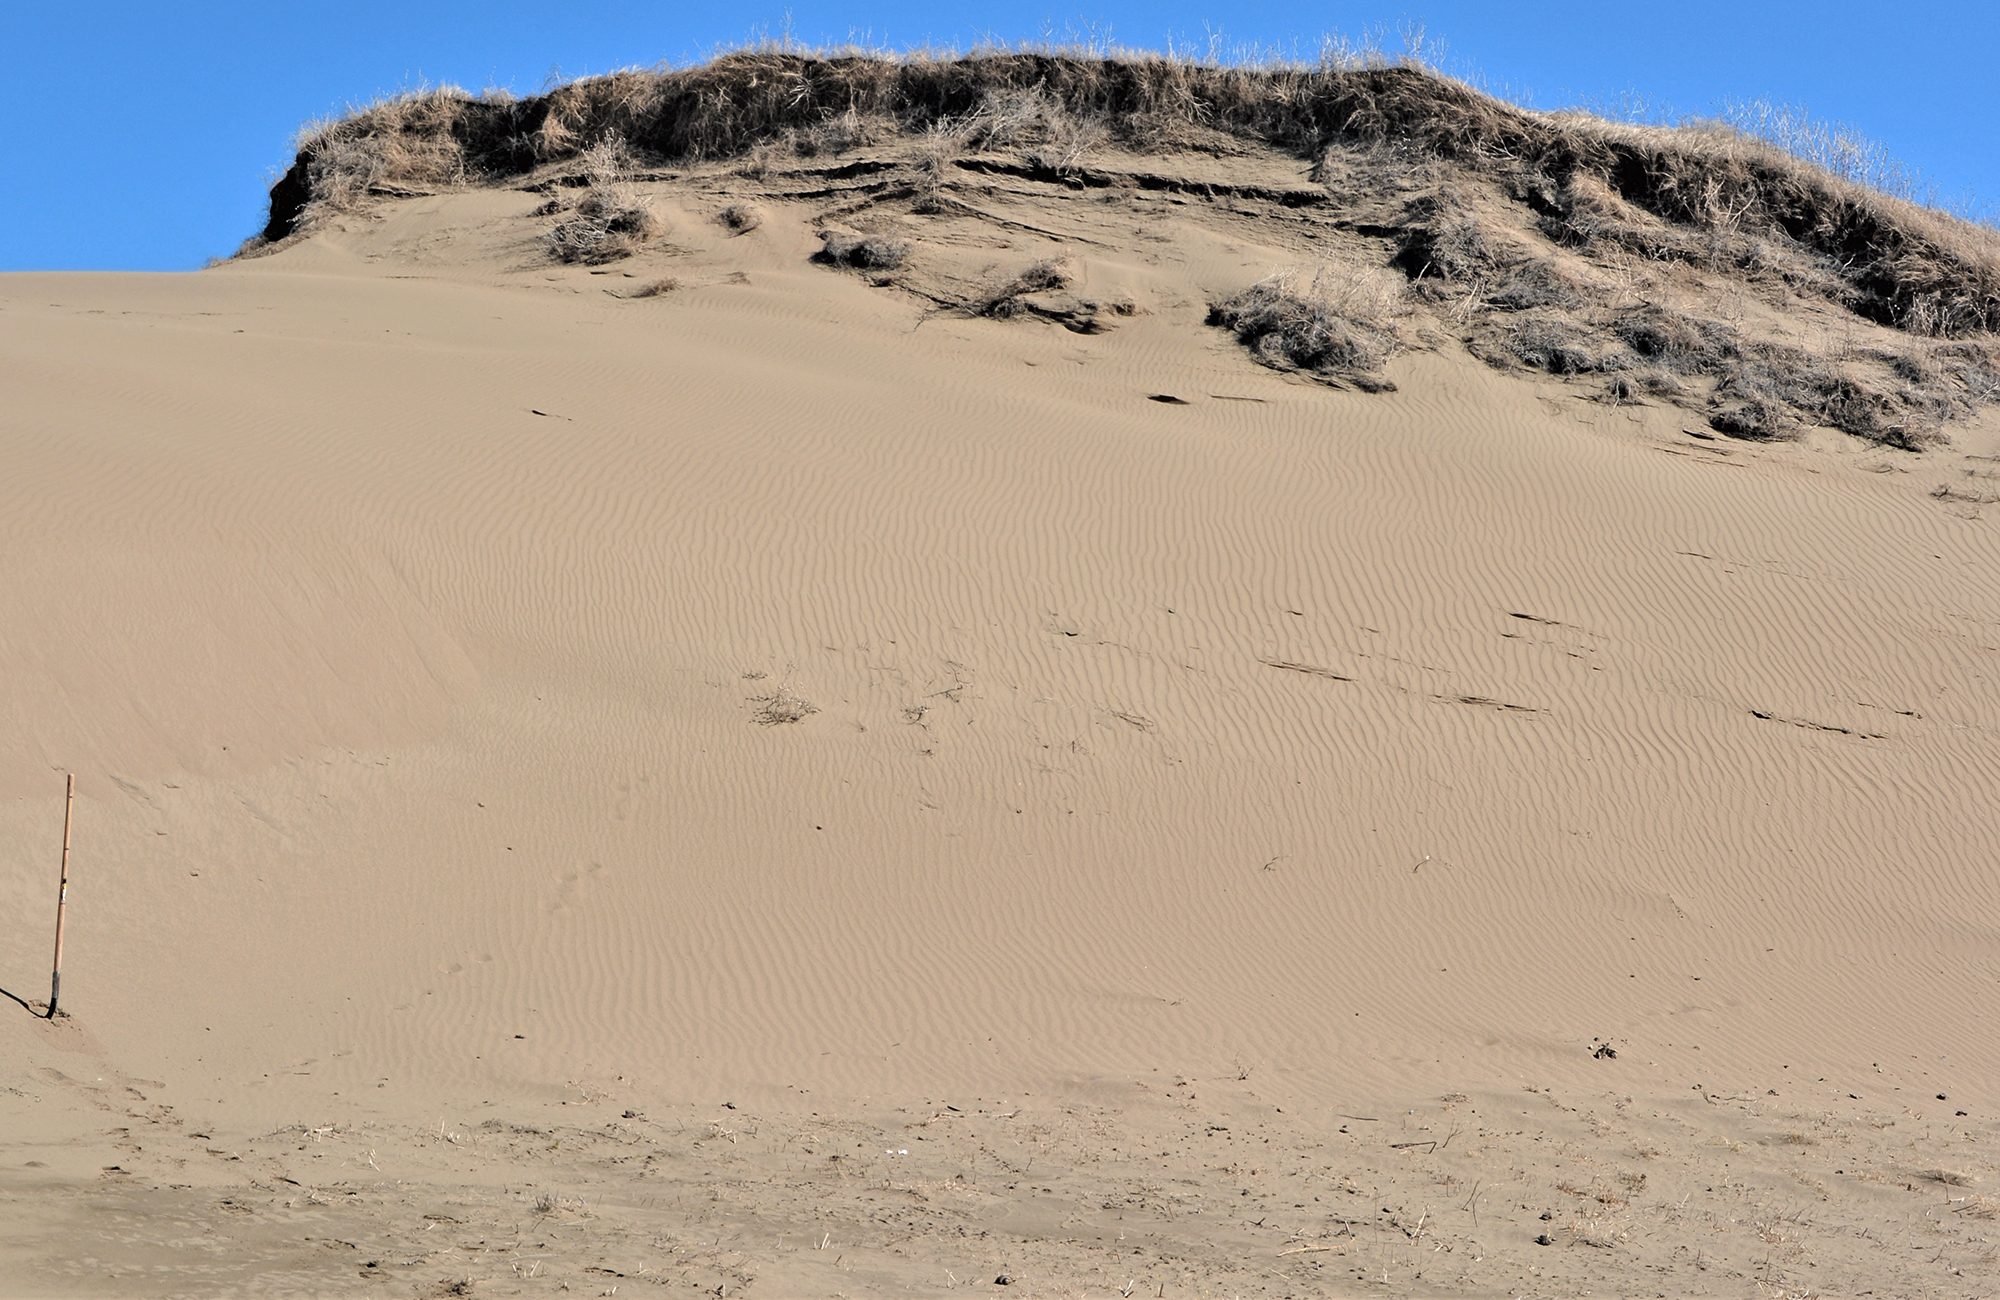 A big hill of sand with blue sky in the background.